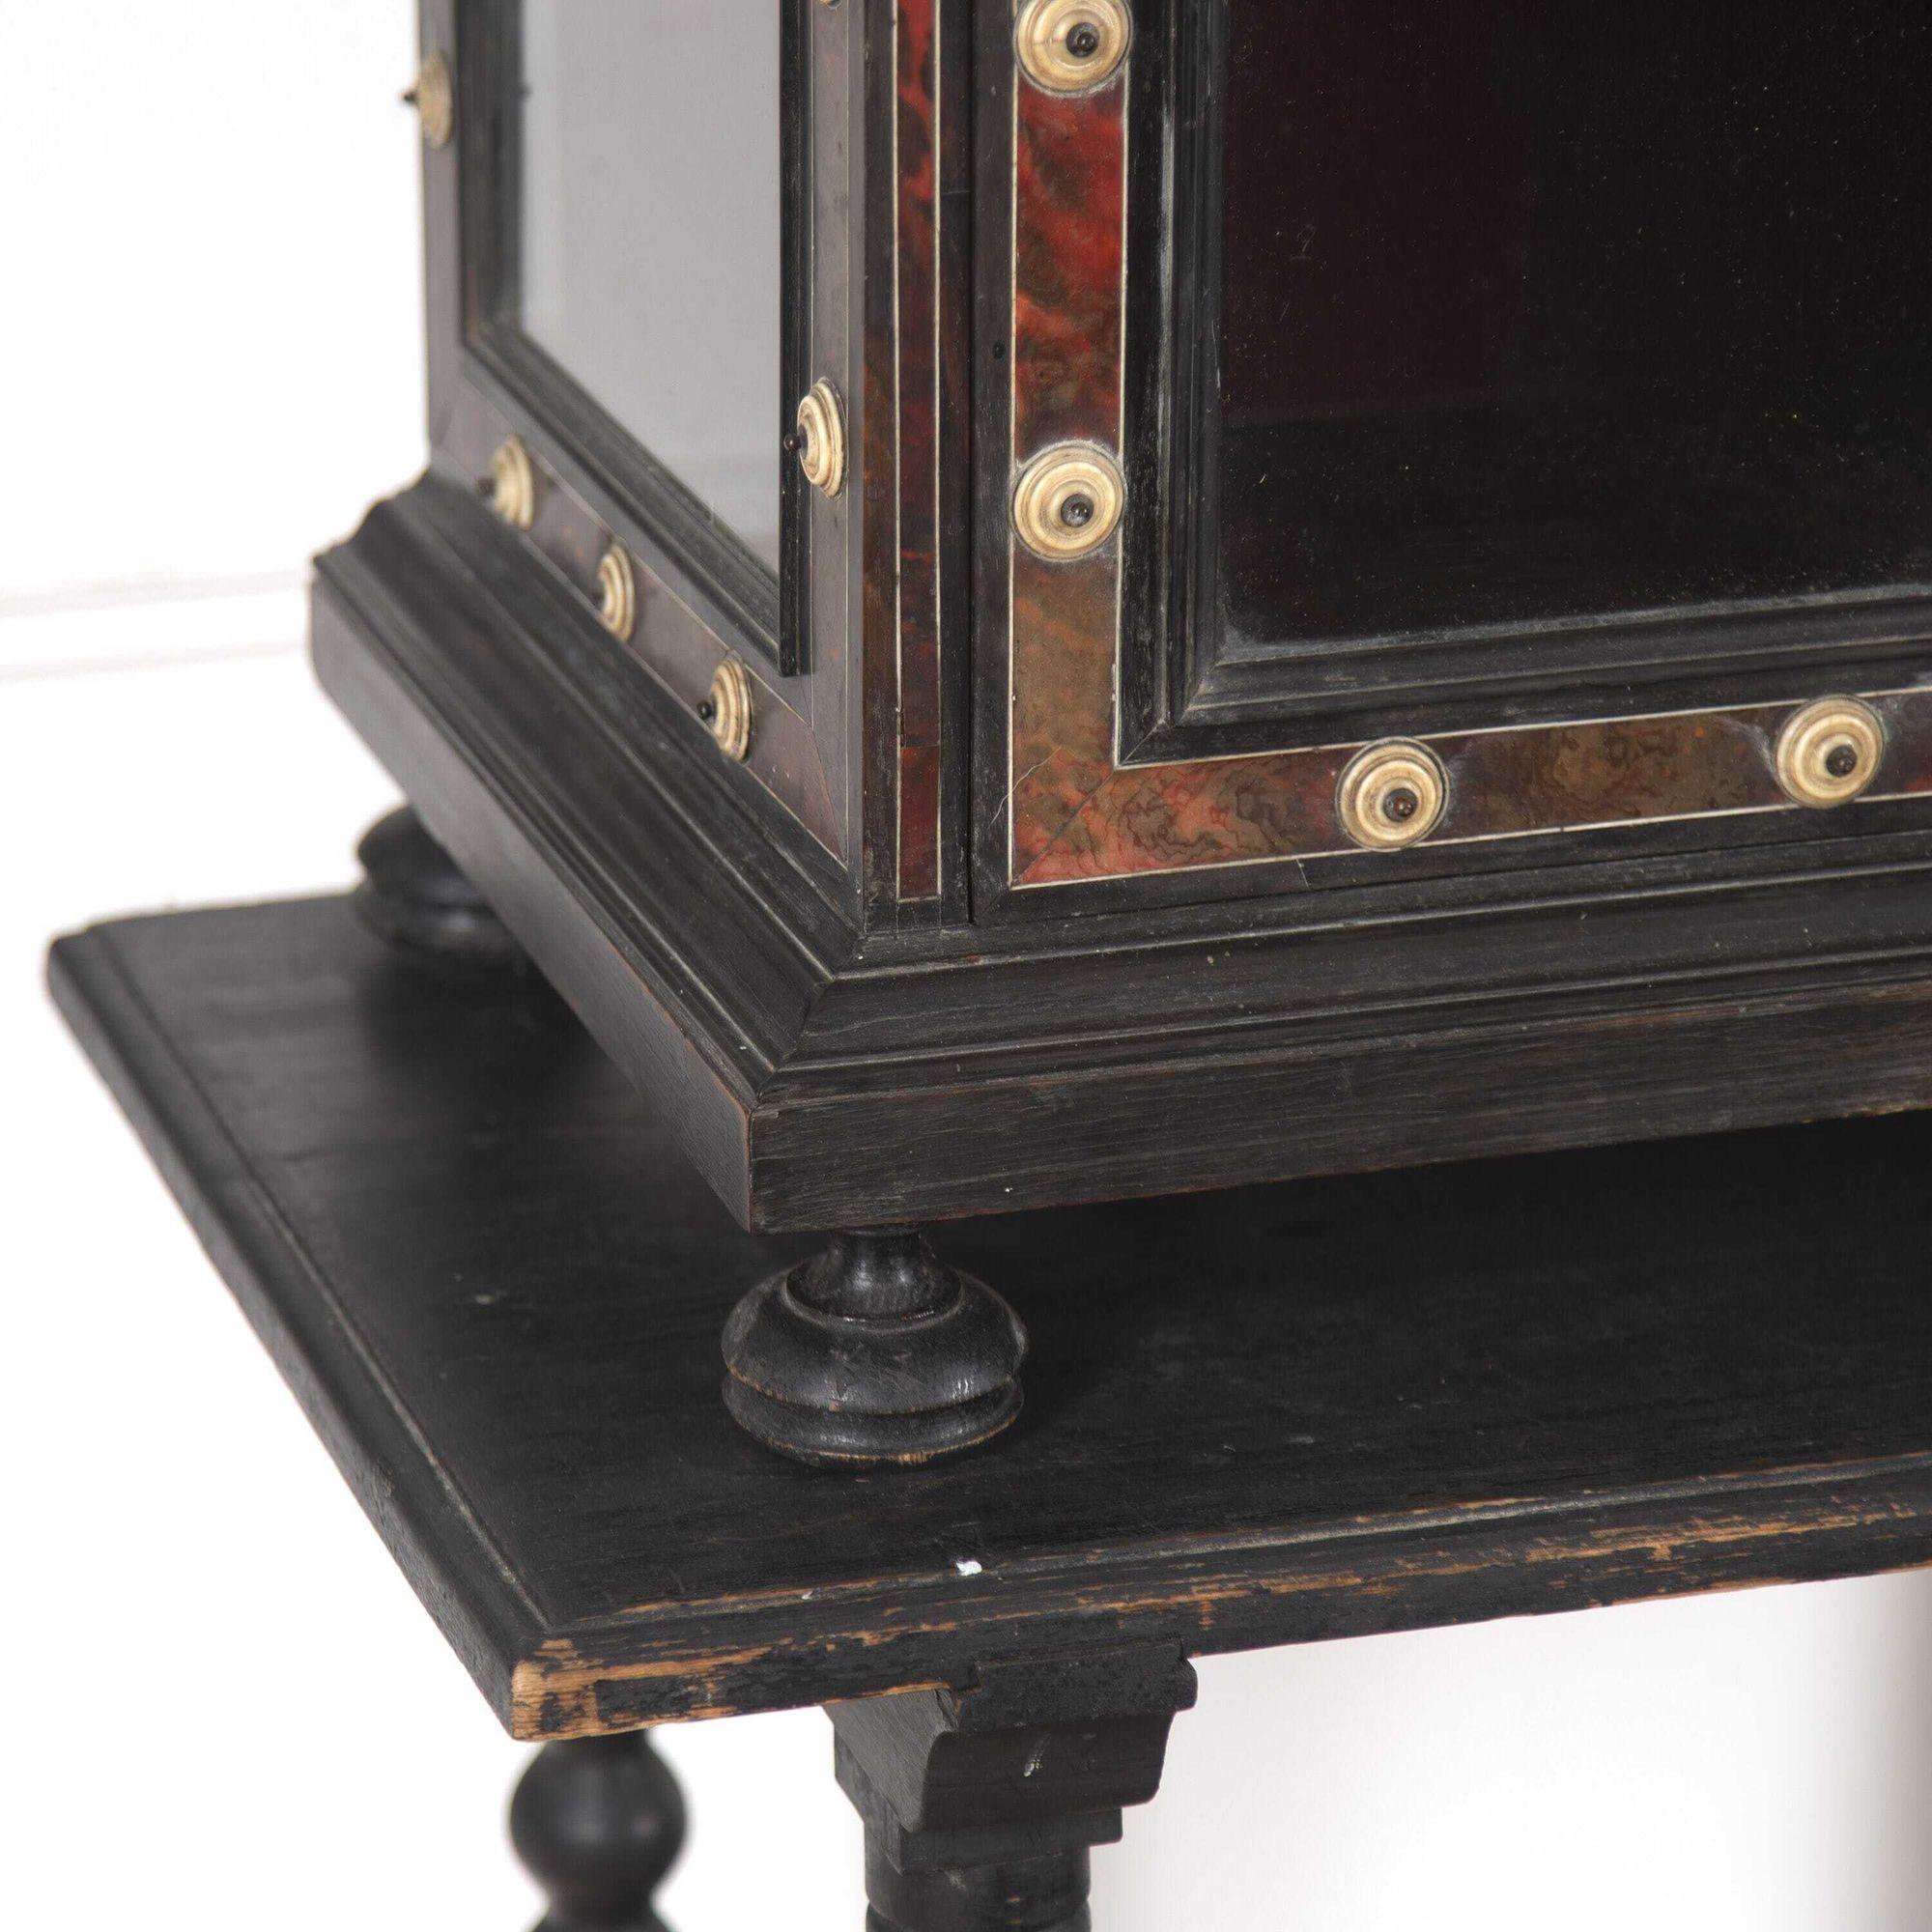 Highly decorative Italian 19th century ebony and tortoiseshell cabinet on stand.
This striking cabinet features an ebony framework with a gallery of turned balustrades, bone roundels and decorative finials to the top, which can simply lift off for